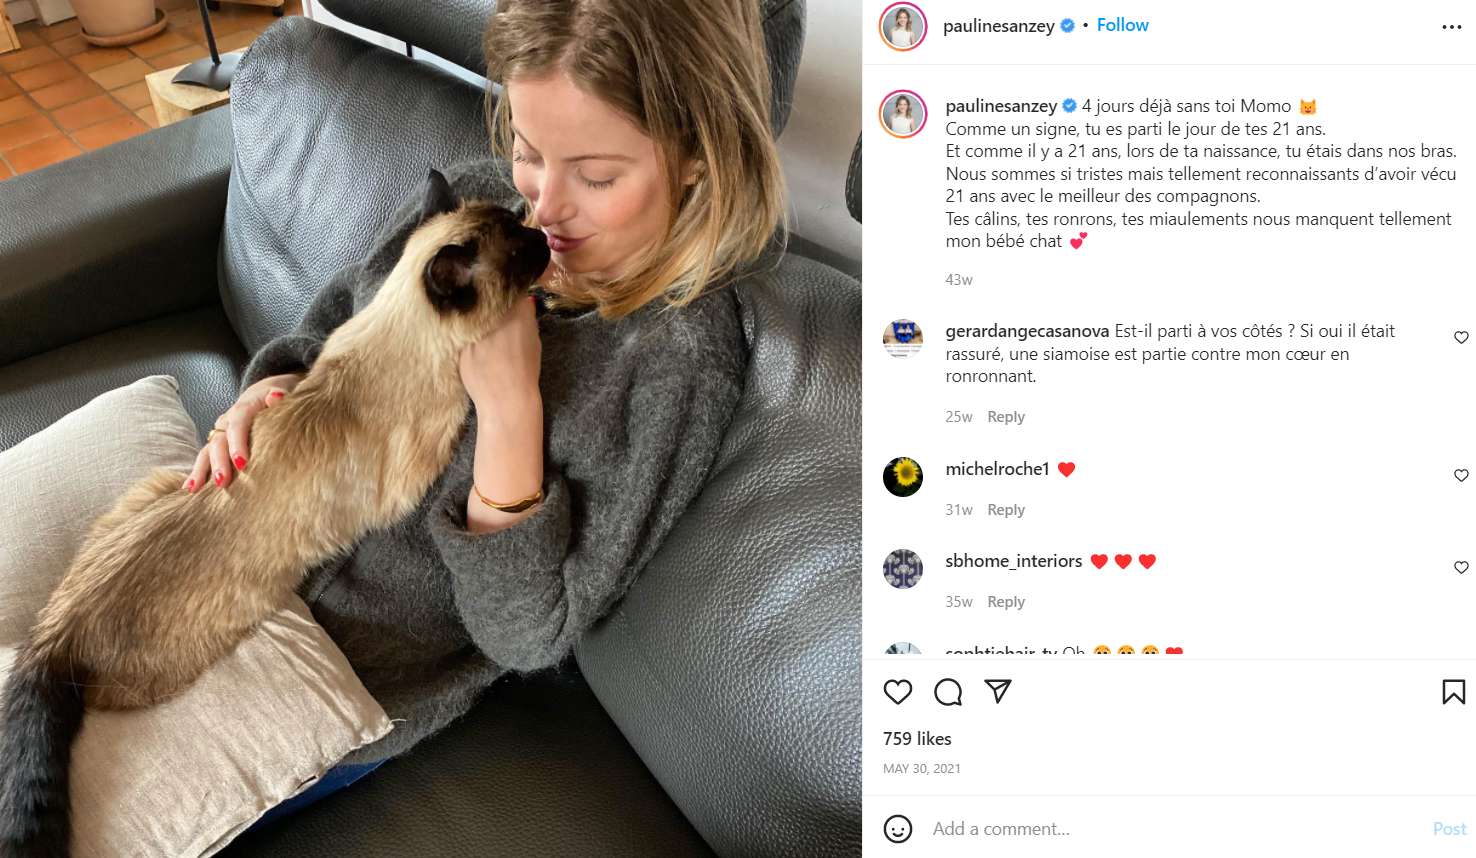 Pauline Sanzey posted about her pet cat on her Insta profile